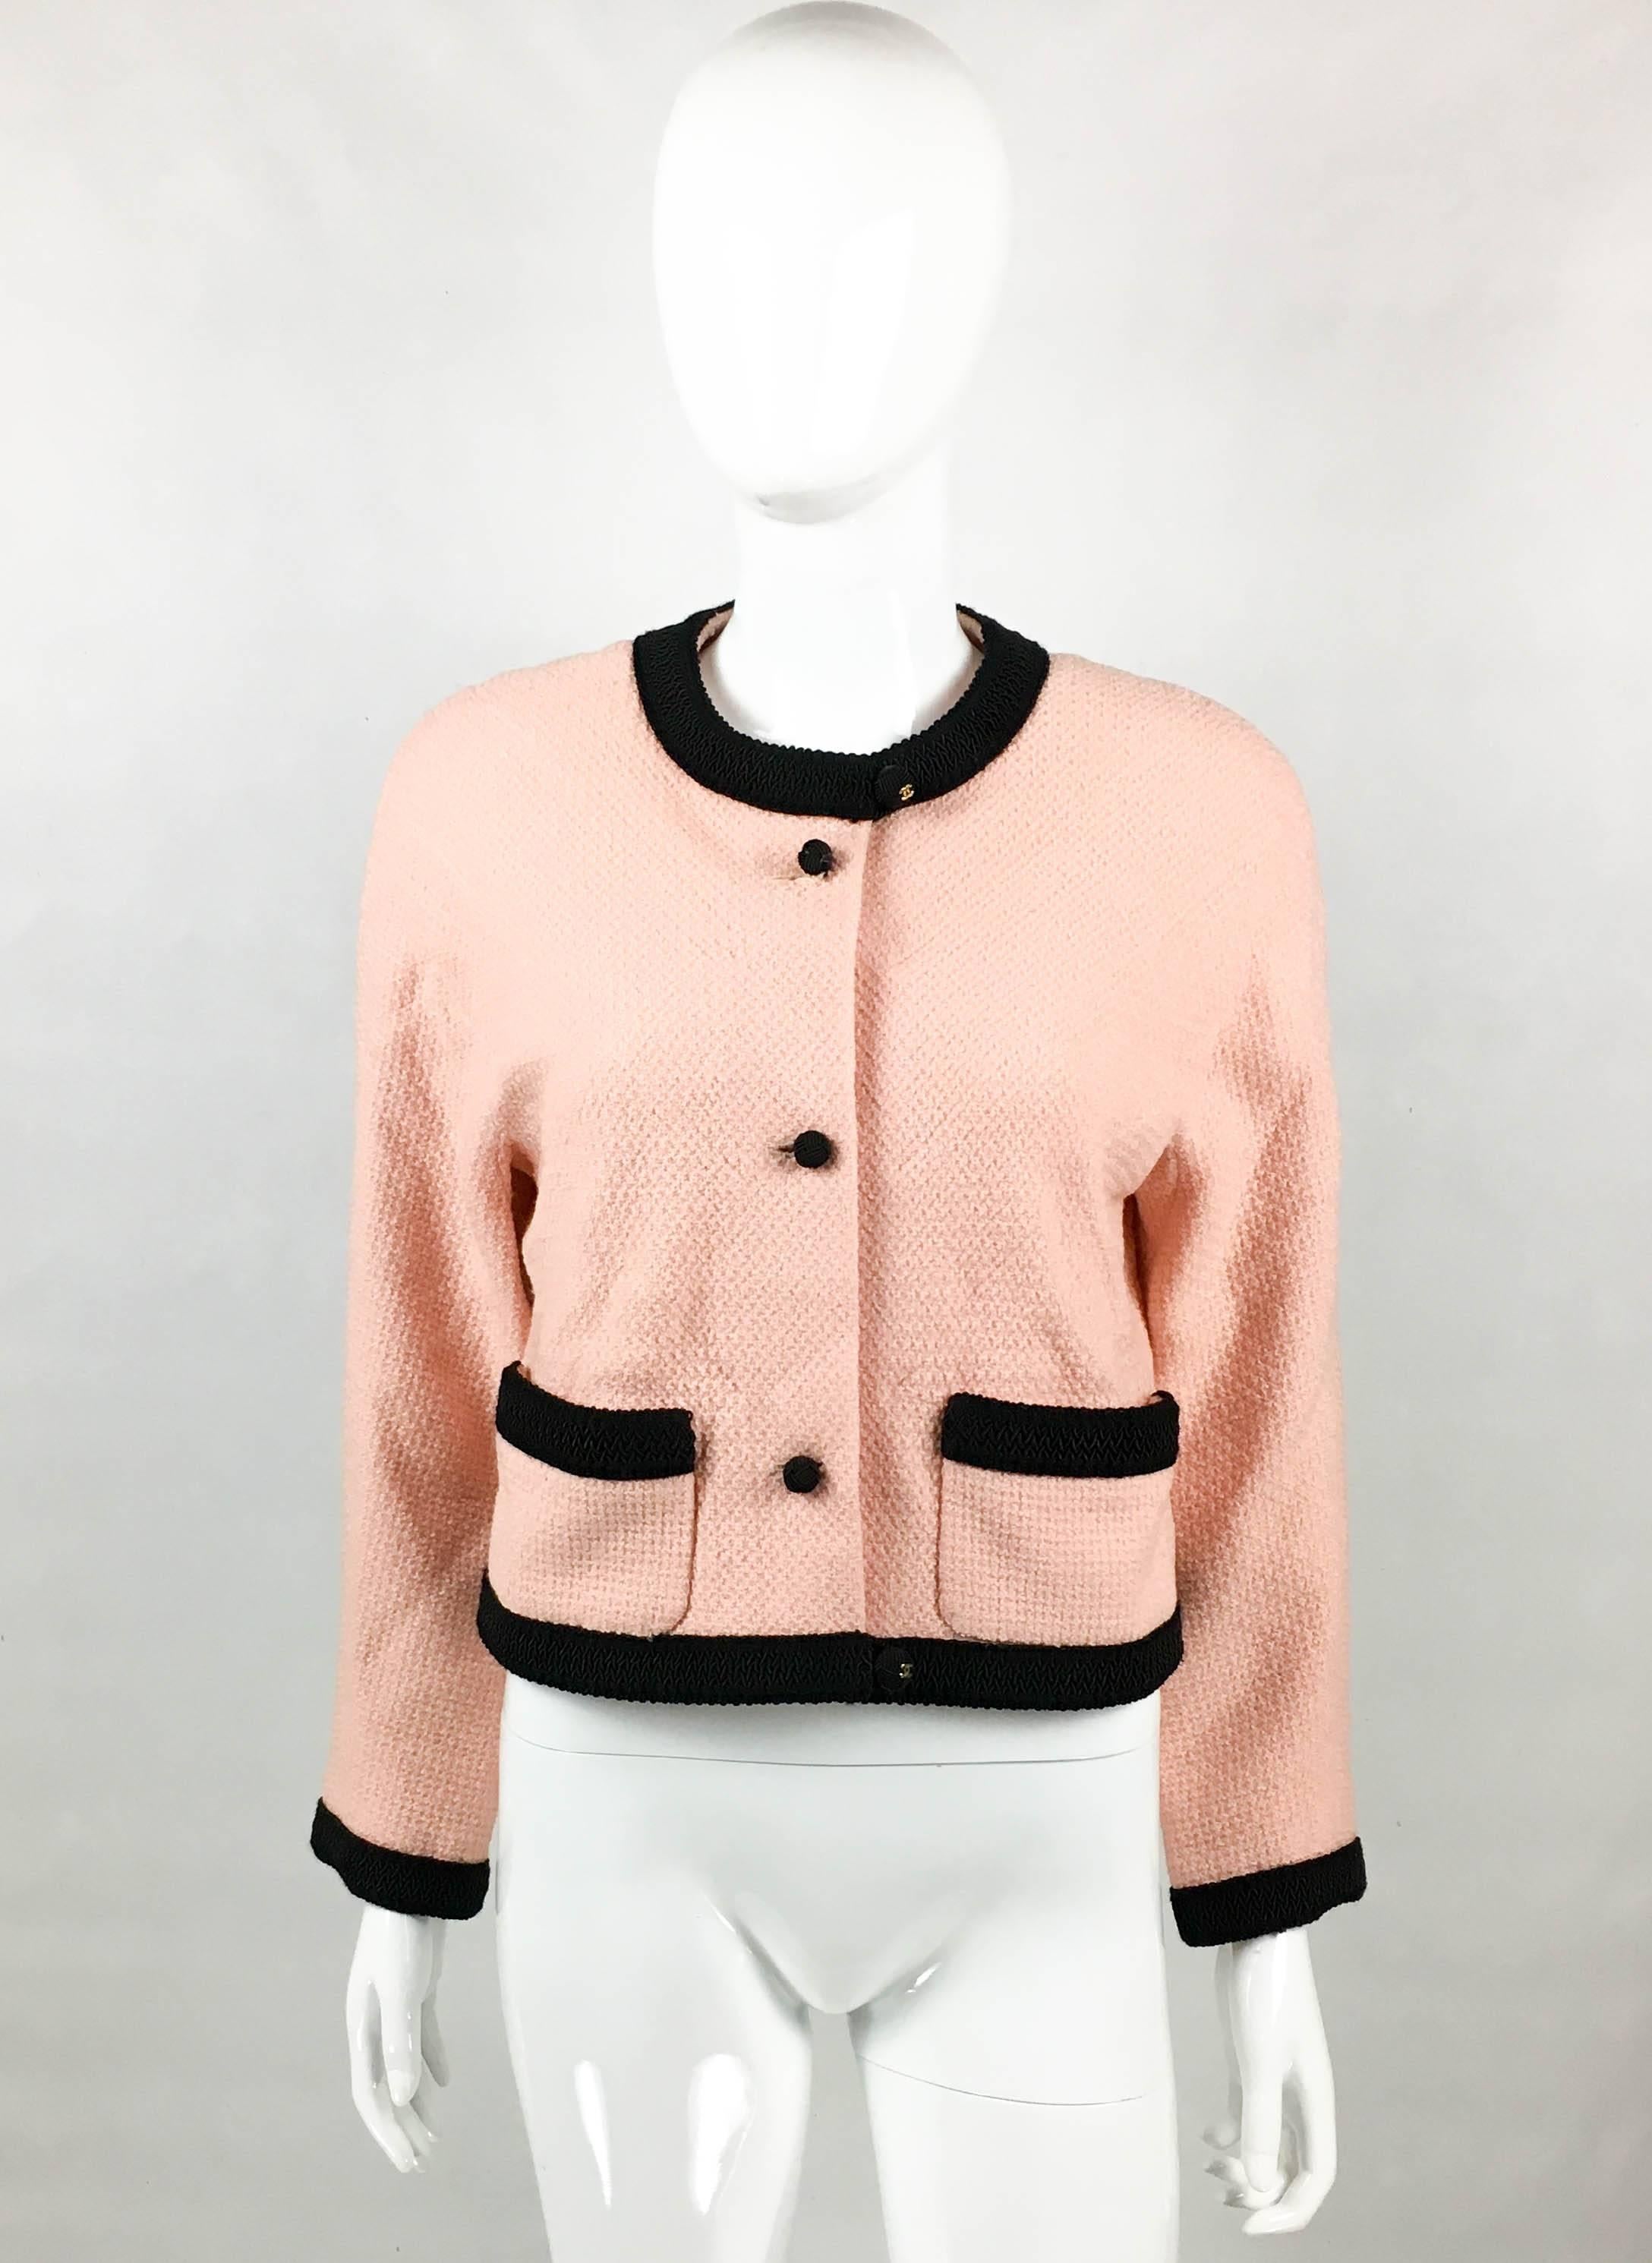 Vintage Chanel Pink Tweed Jacket. This beautiful jacket by Chanel was created in the 1990’s. In pink tweed, it features black knot buttons and black cord trims to the collar, hemline, cuffs and pockets. The buttons on the collar and hemline have a